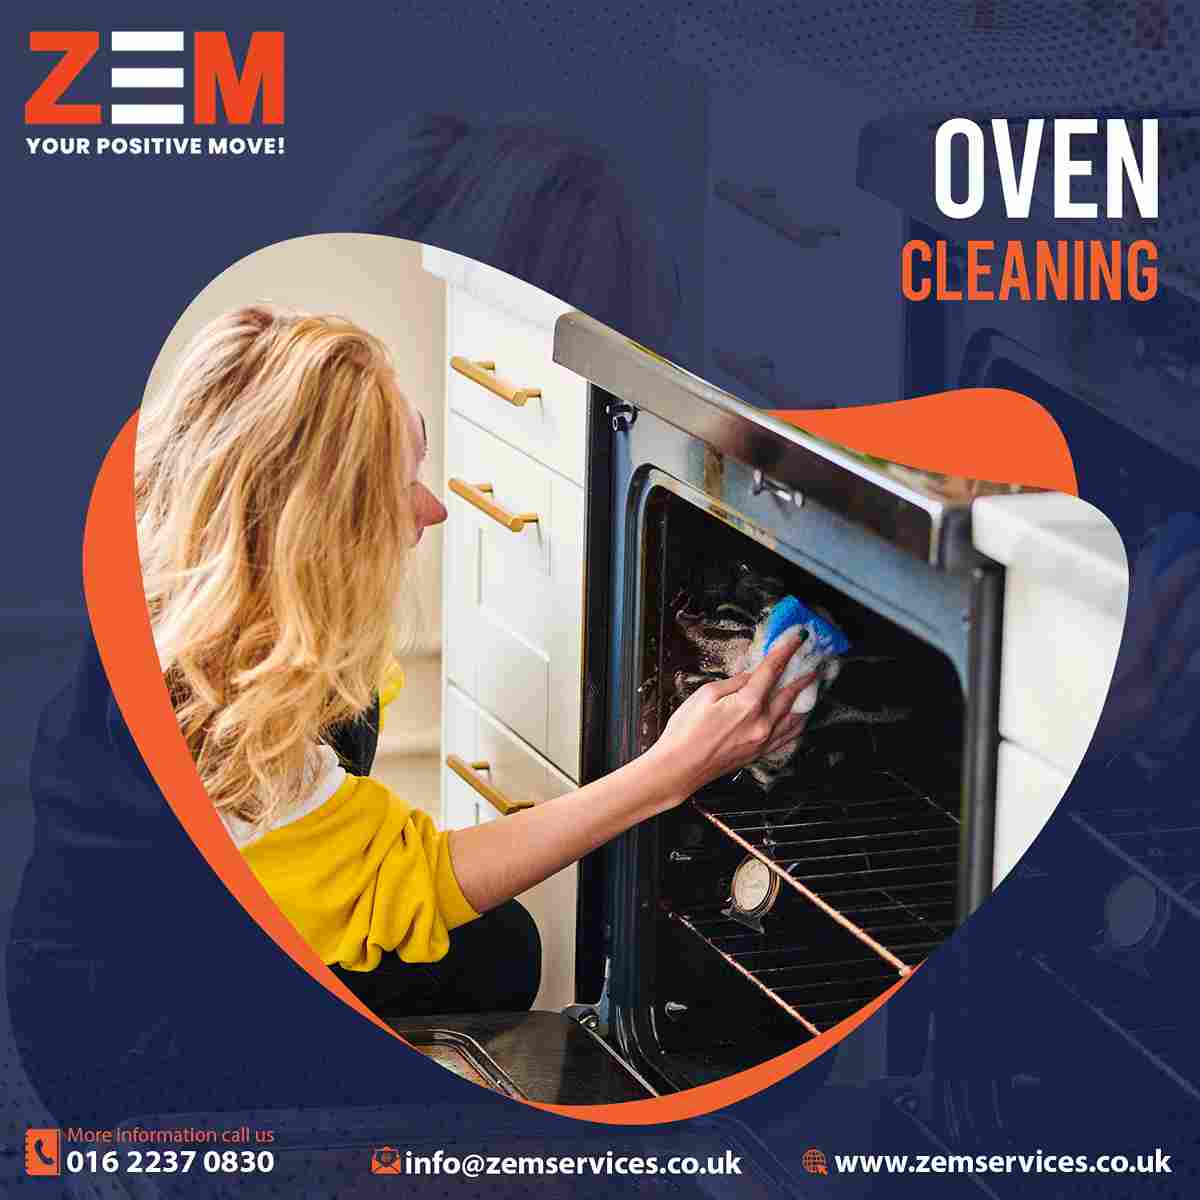 Zem Oven Cleaning